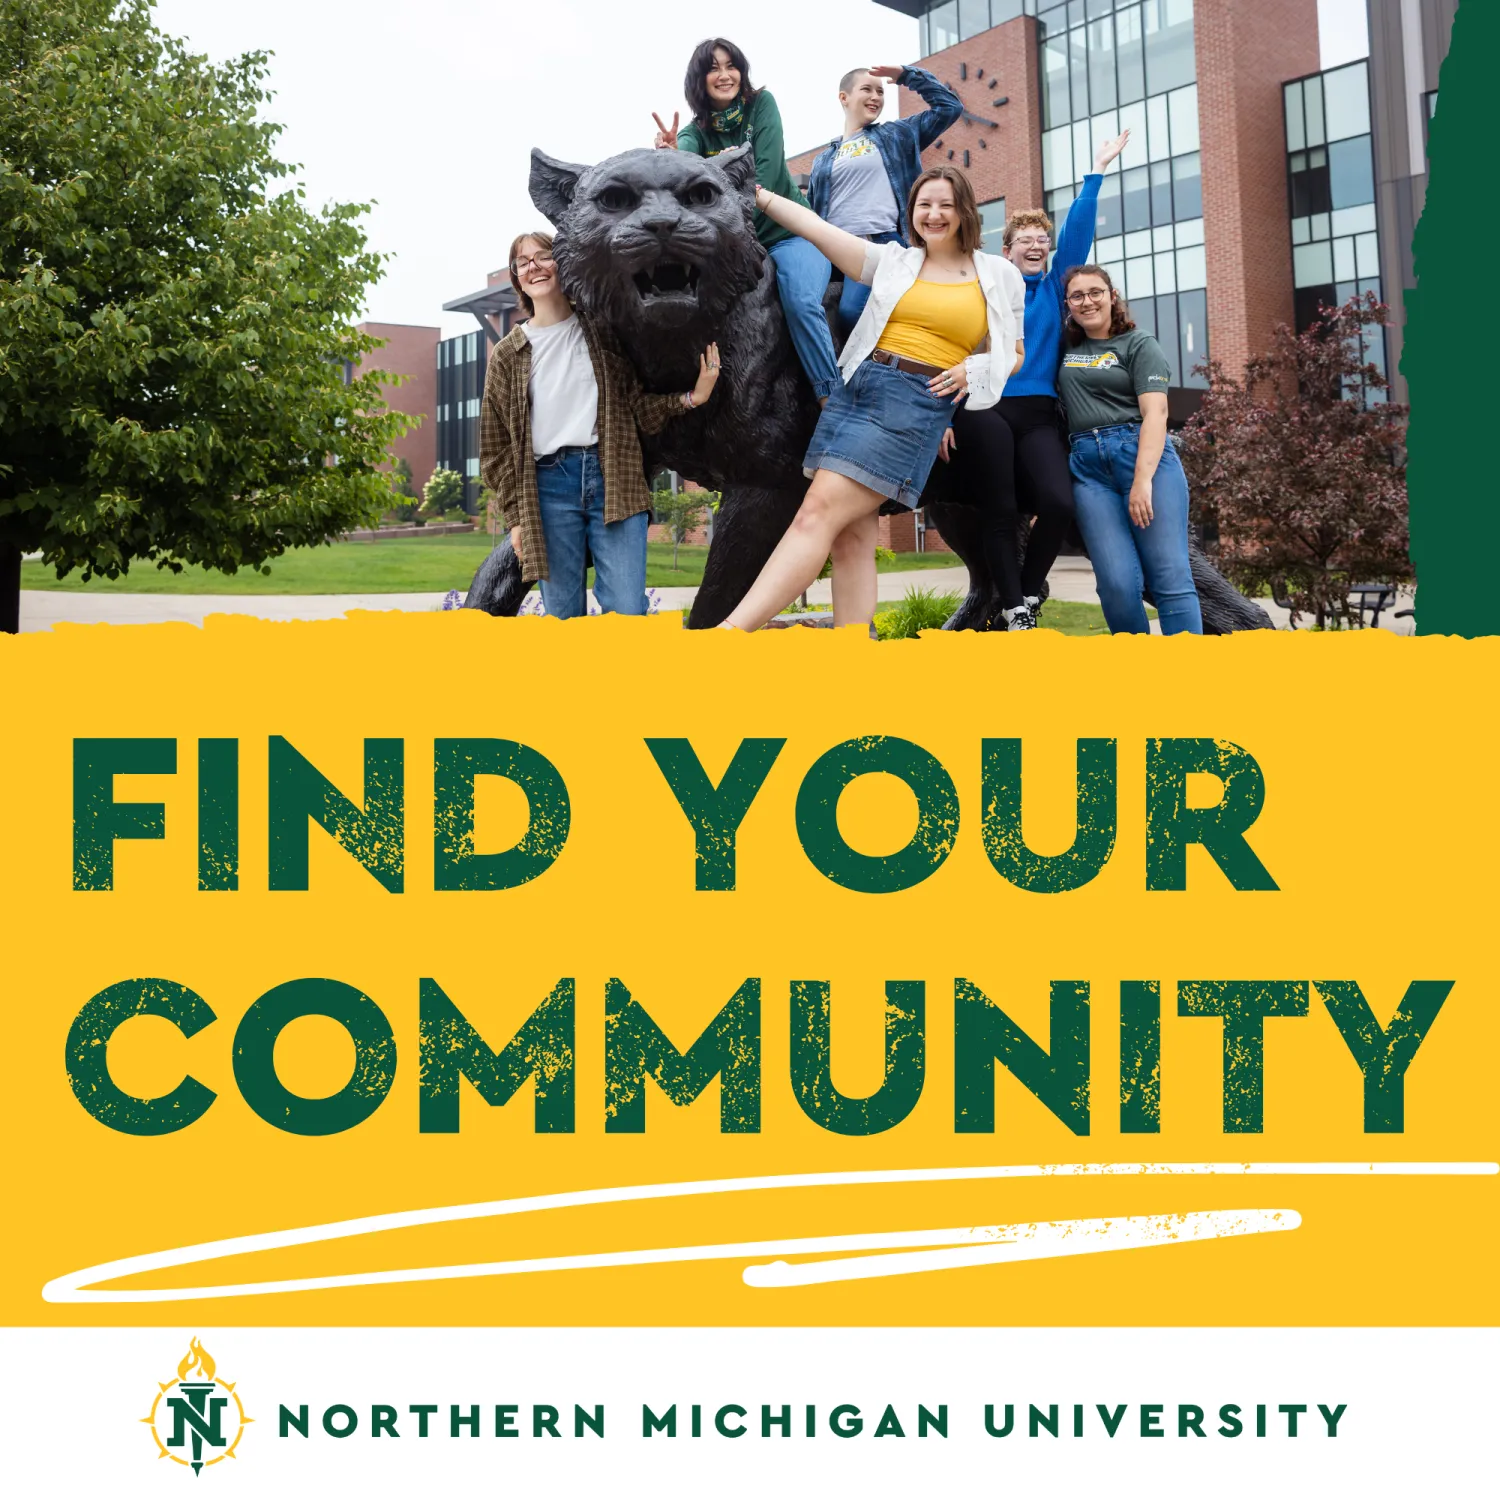 FInd Your Community ad group of students at Wildcat statue